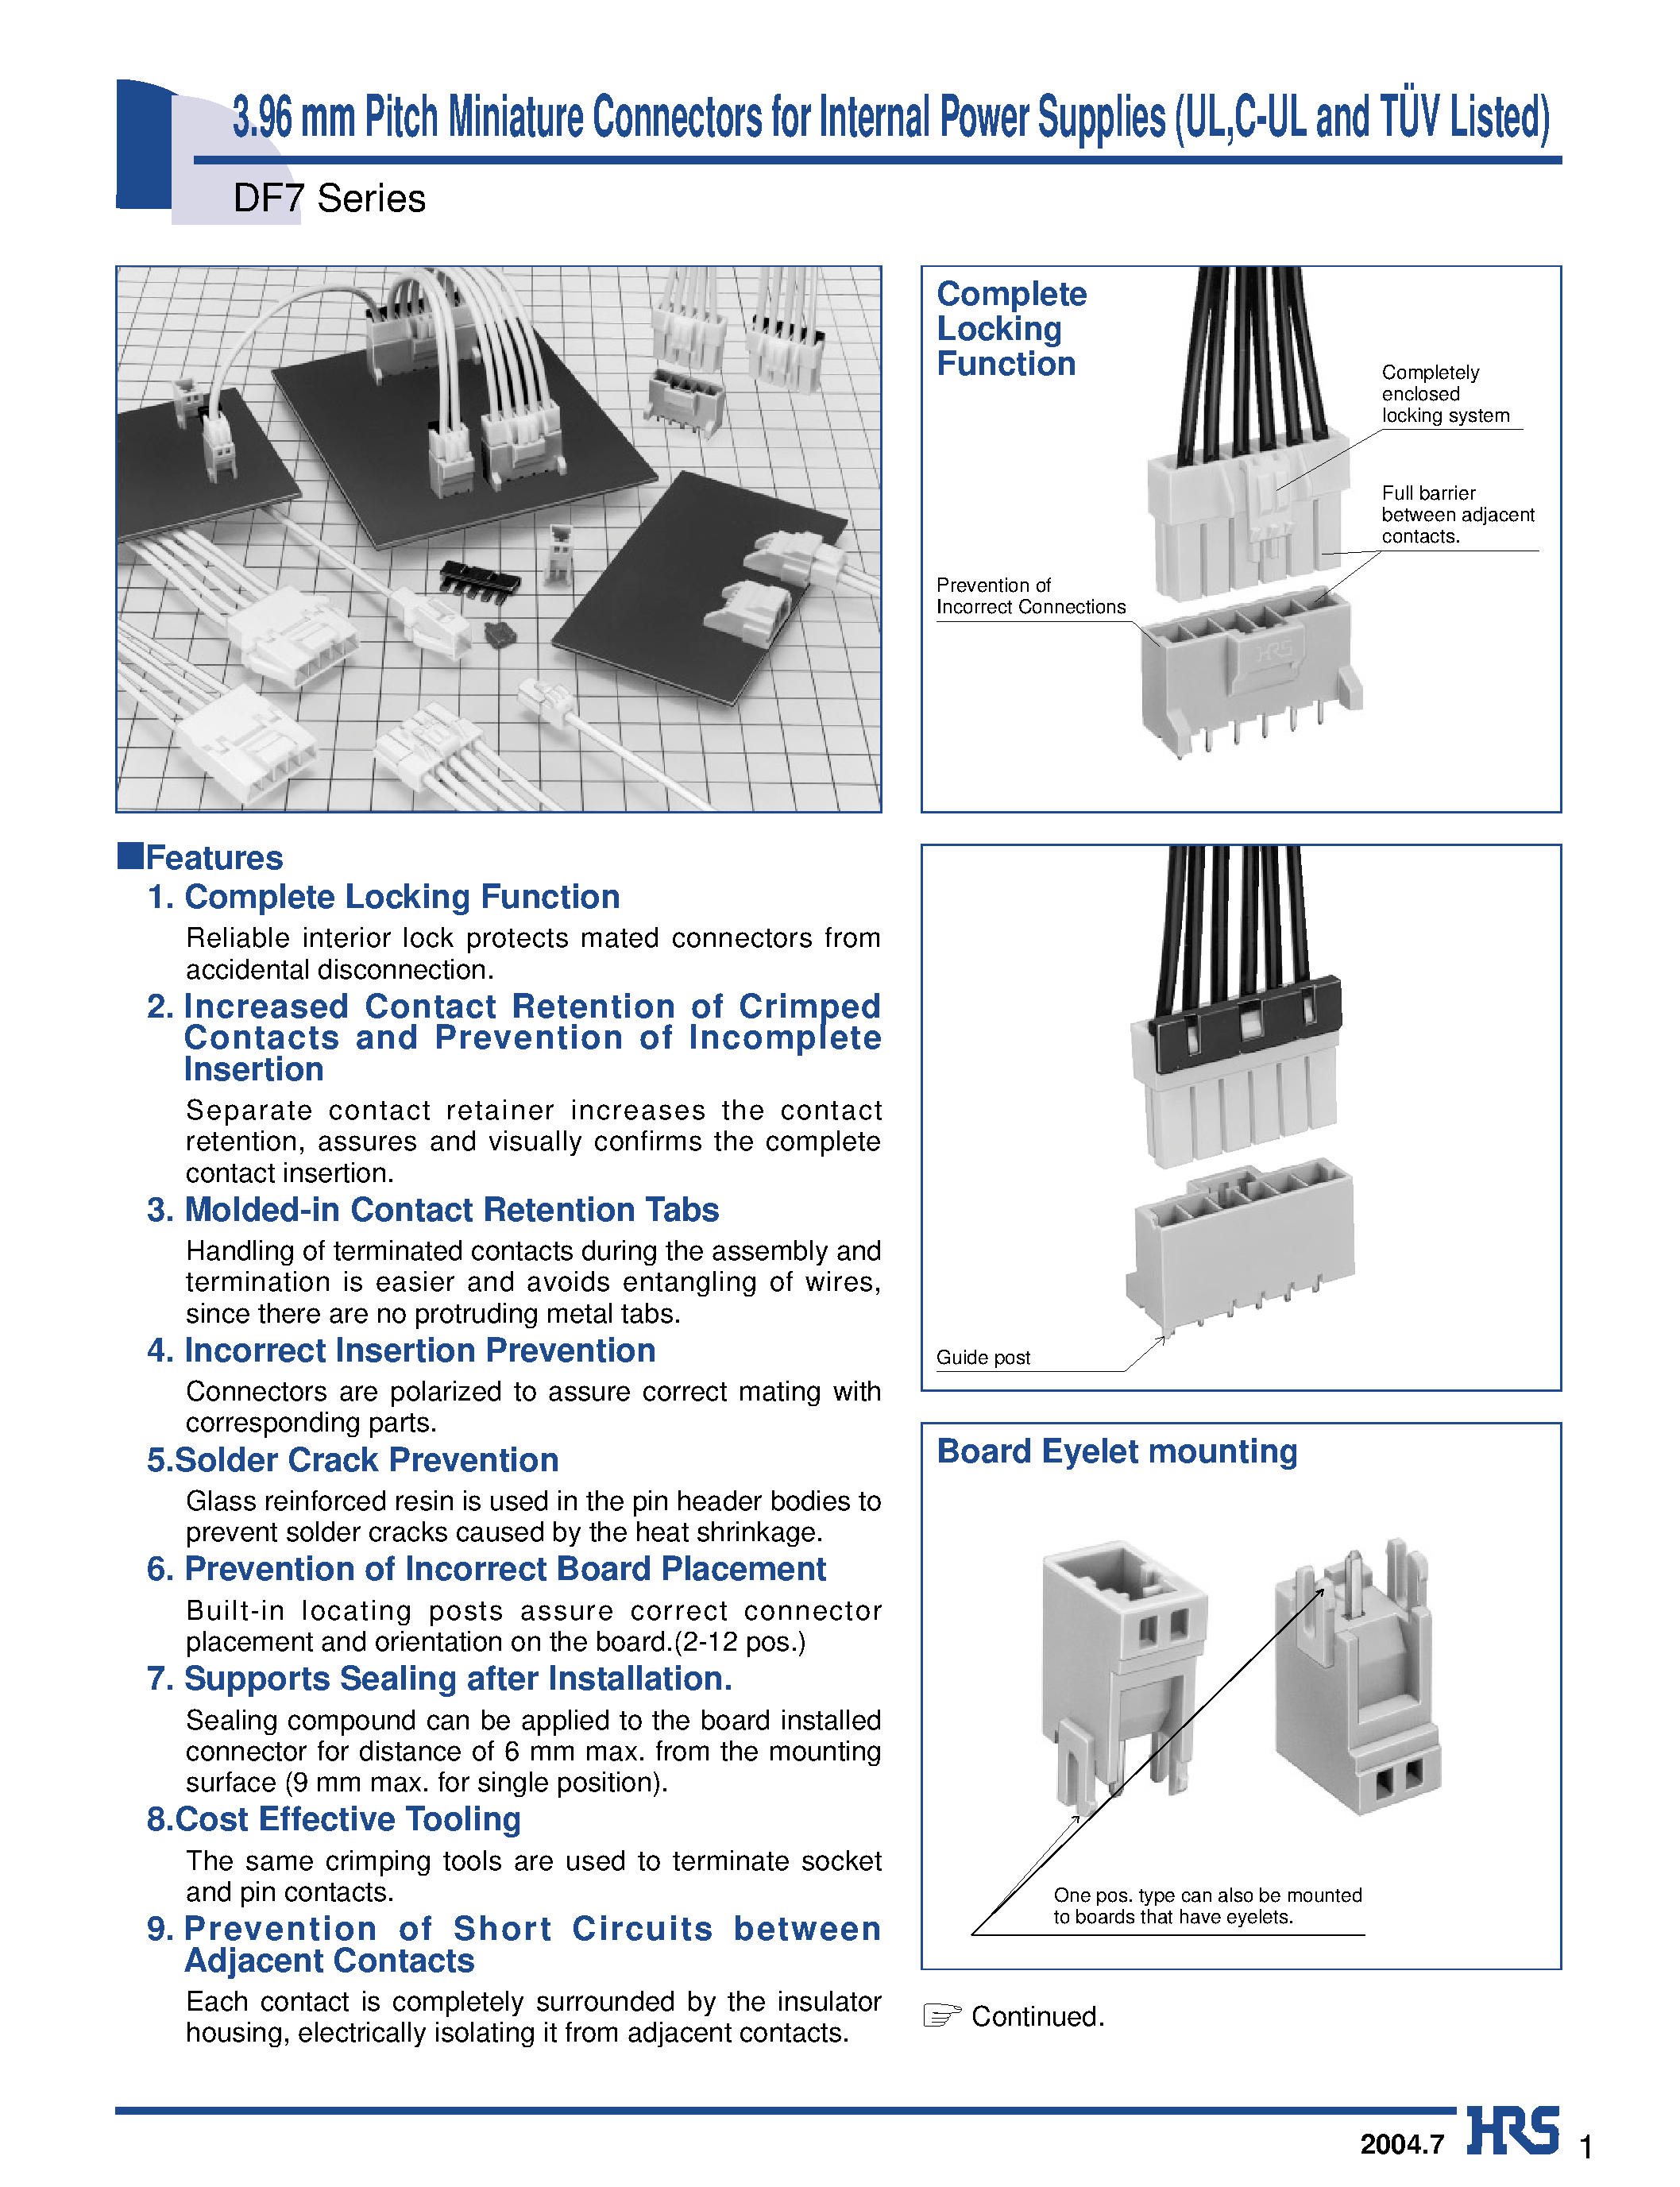 Datasheet DF7-1RS/P-3.96DS - 3.96 mm Pitch Miniature Connectors for Internal Power Supplies (UL /C-UL and TUV Listed) page 1